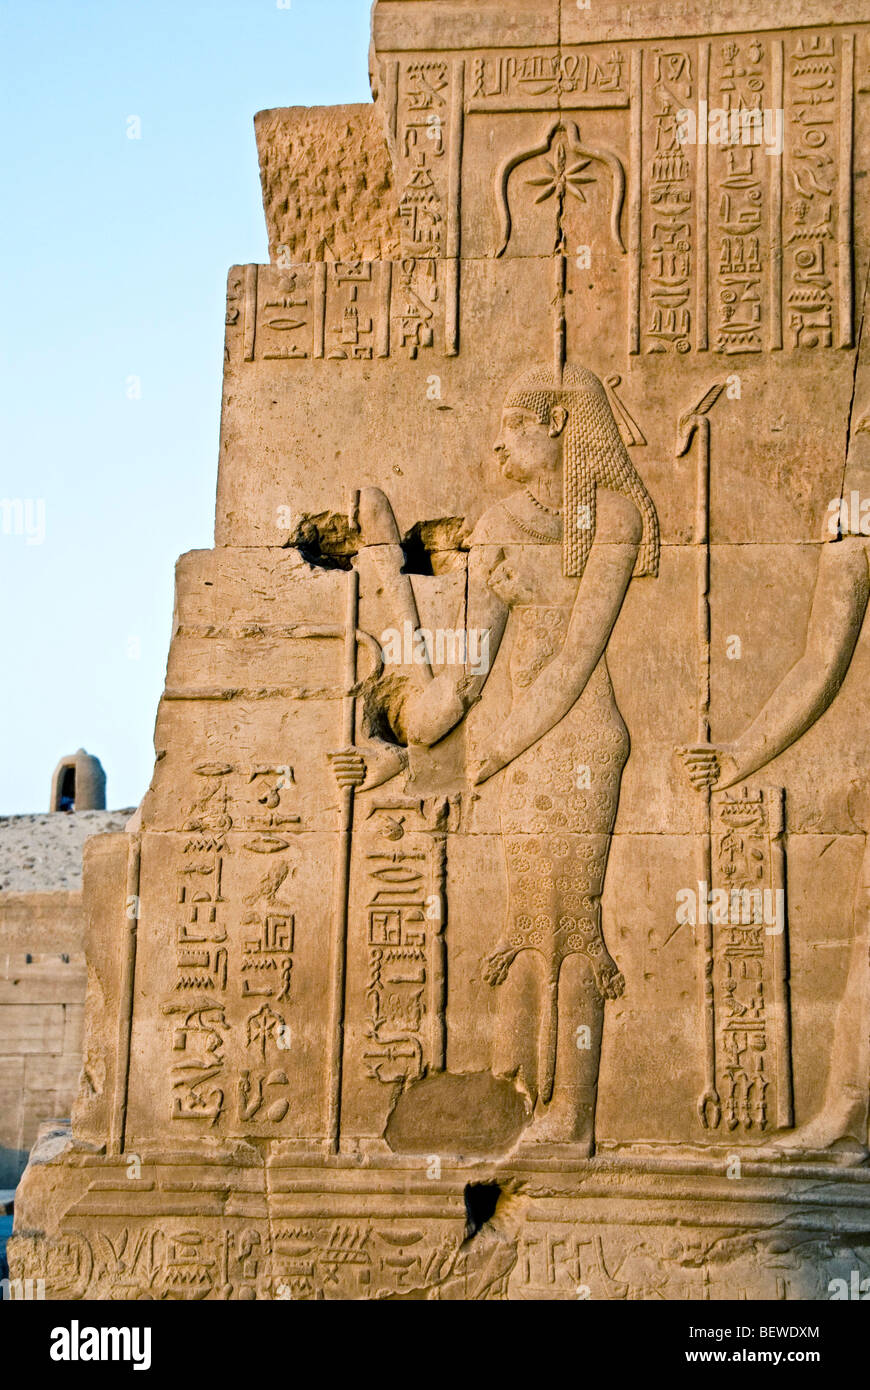 Relief on a wall of the temple of Kom Ombo, Egypt, close-up Stock Photo